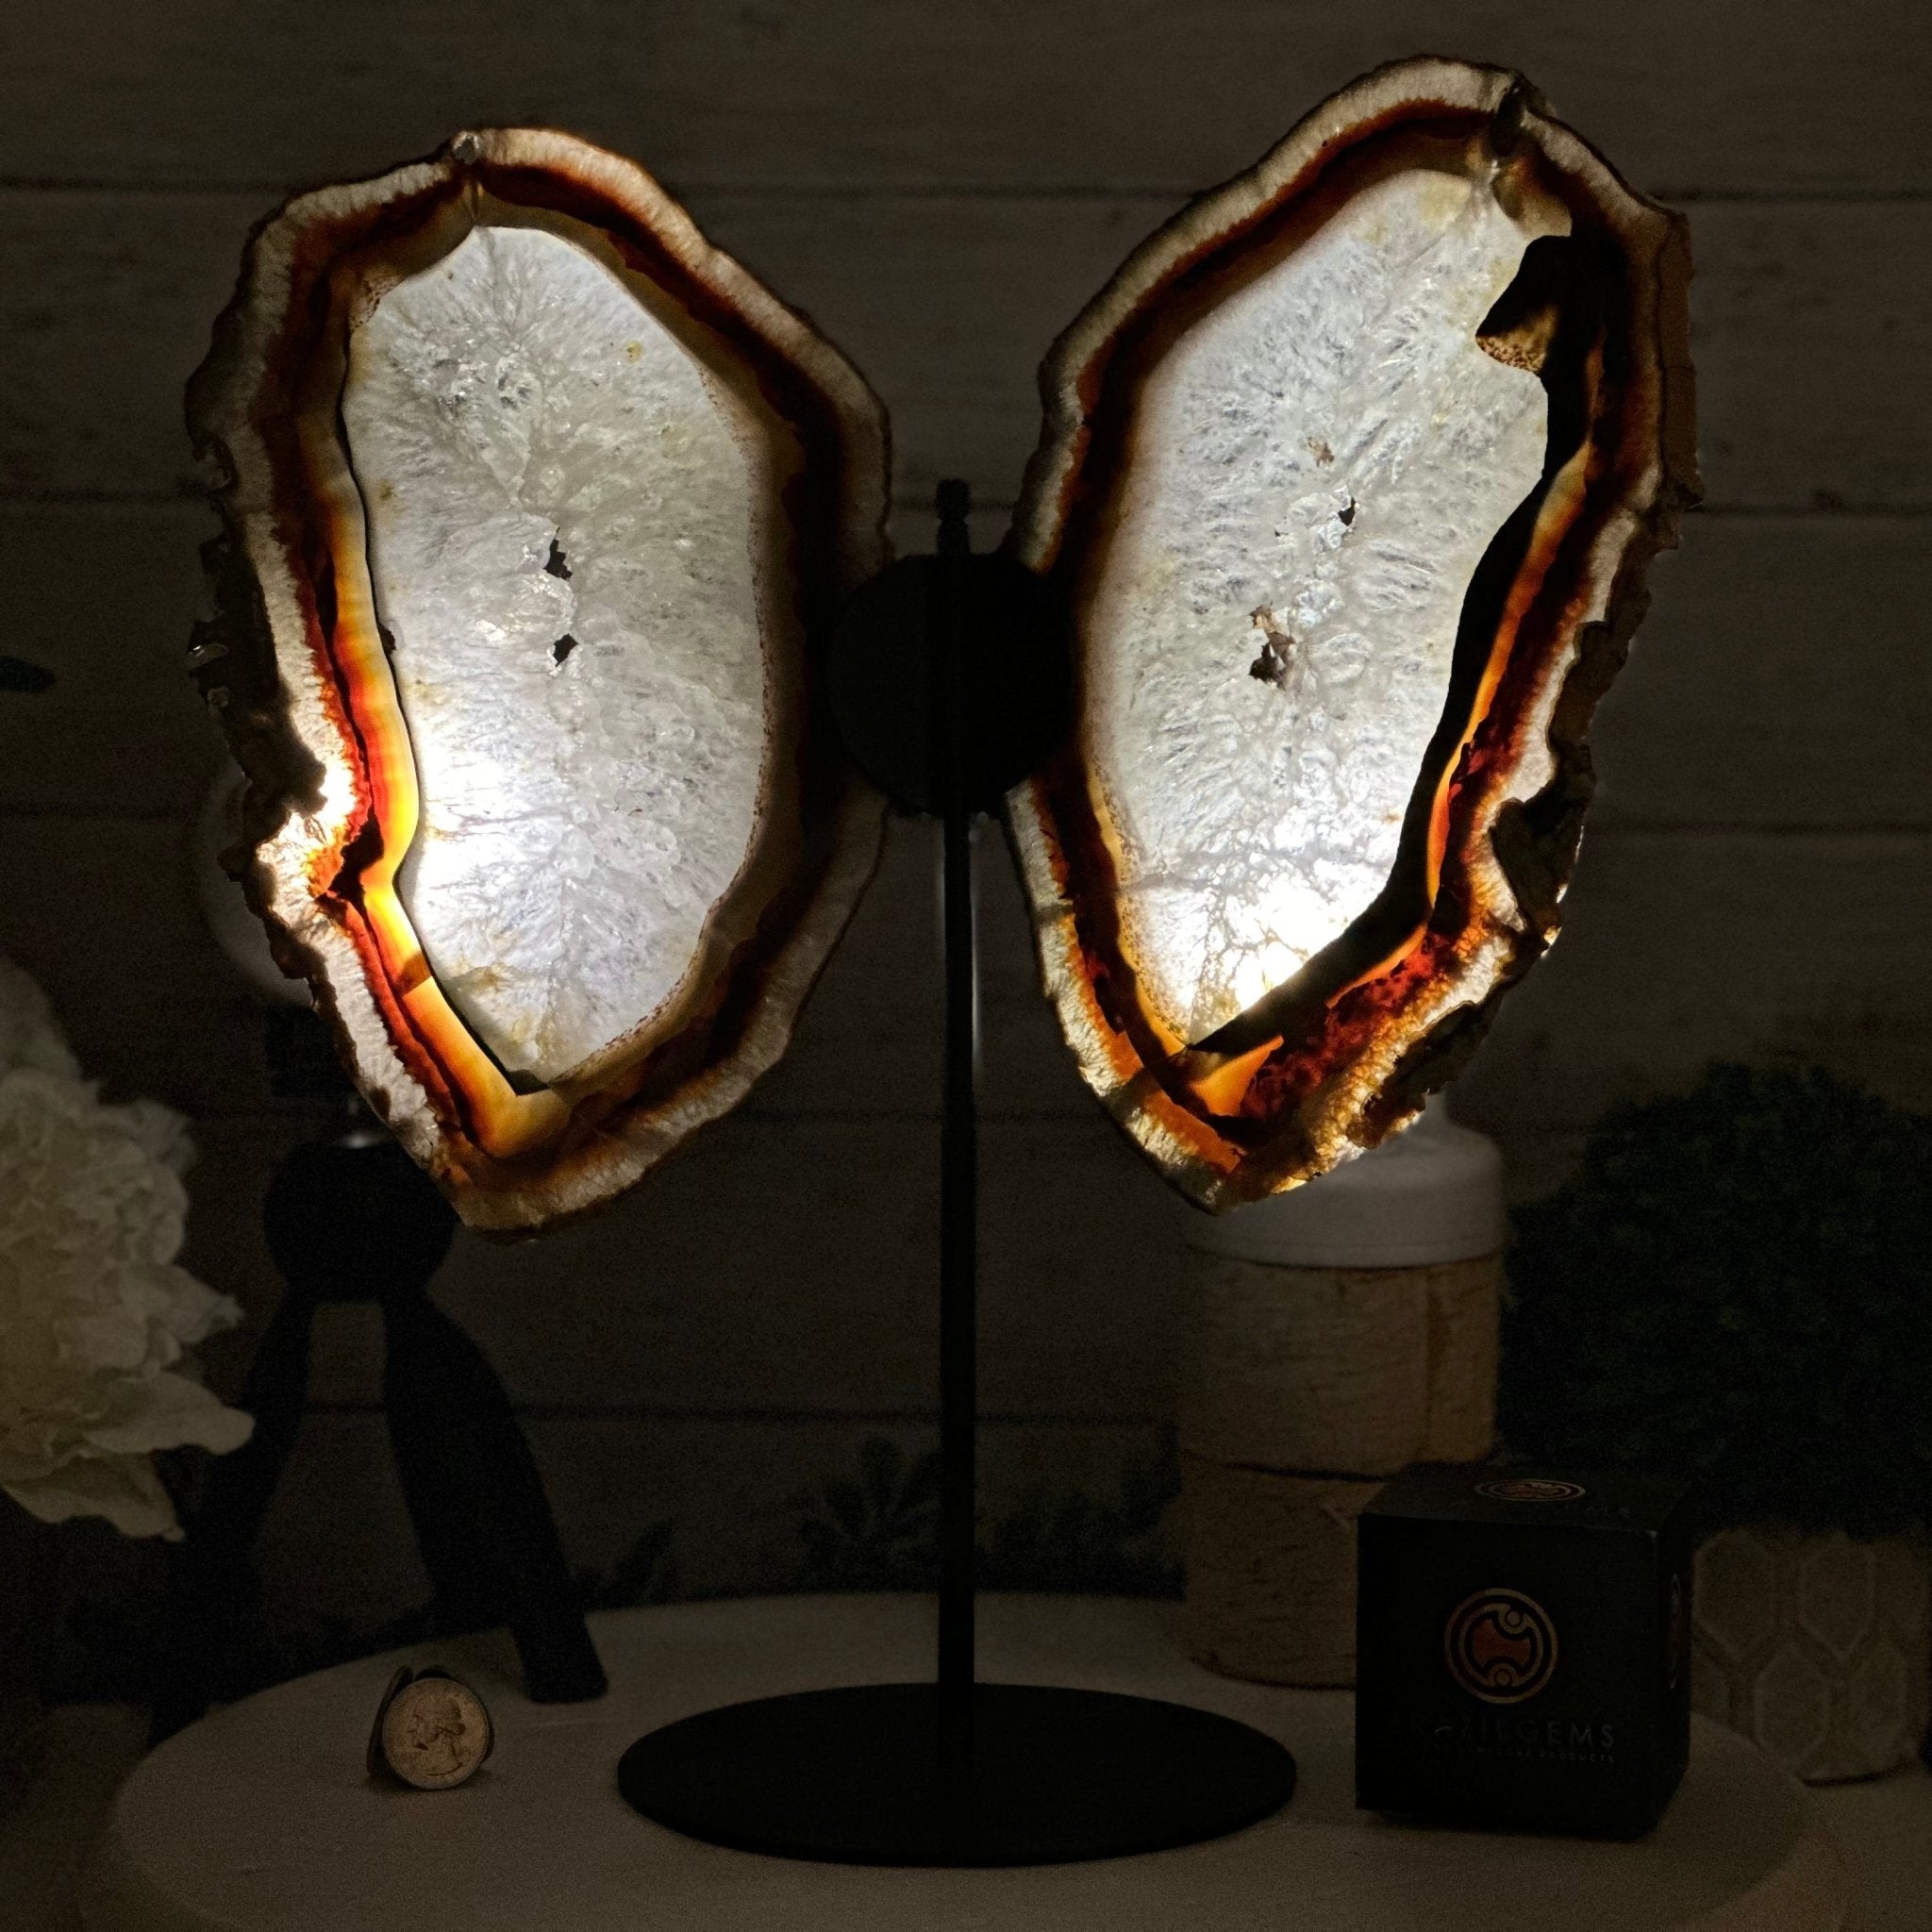 Natural Brazilian Agate "Butterfly Wings", 15" Tall #5050NA-098 - Brazil GemsBrazil GemsNatural Brazilian Agate "Butterfly Wings", 15" Tall #5050NA-098Agate Butterfly Wings5050NA-098